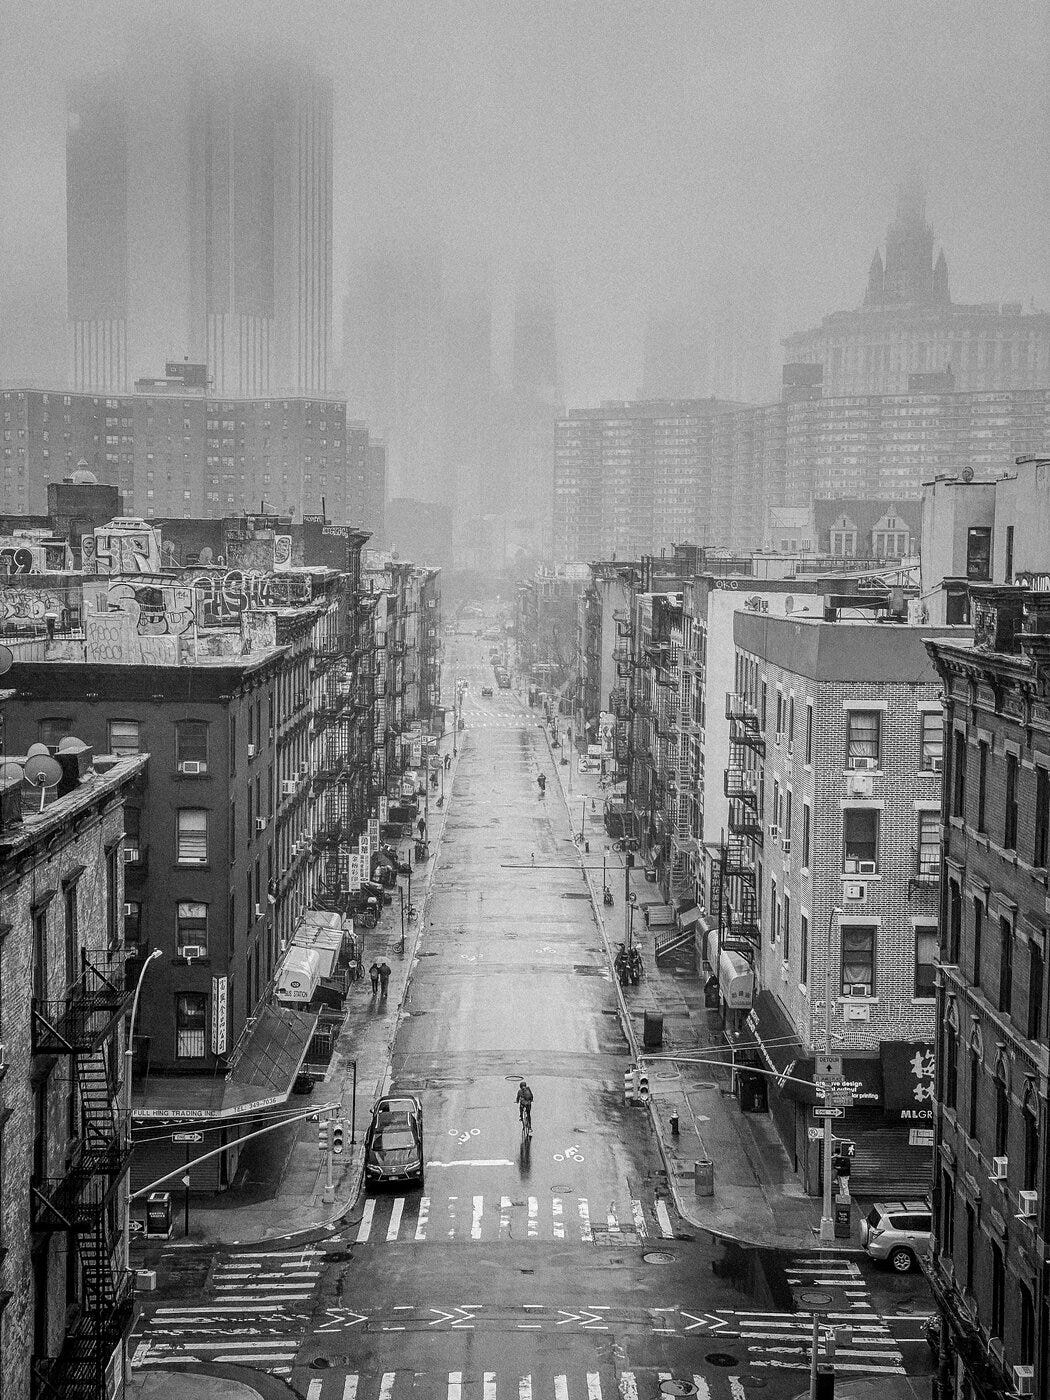 A view of downtown Manhattan and Chinatown on a foggy, wet day during the Coronavirus lock down in New York, N.Y.